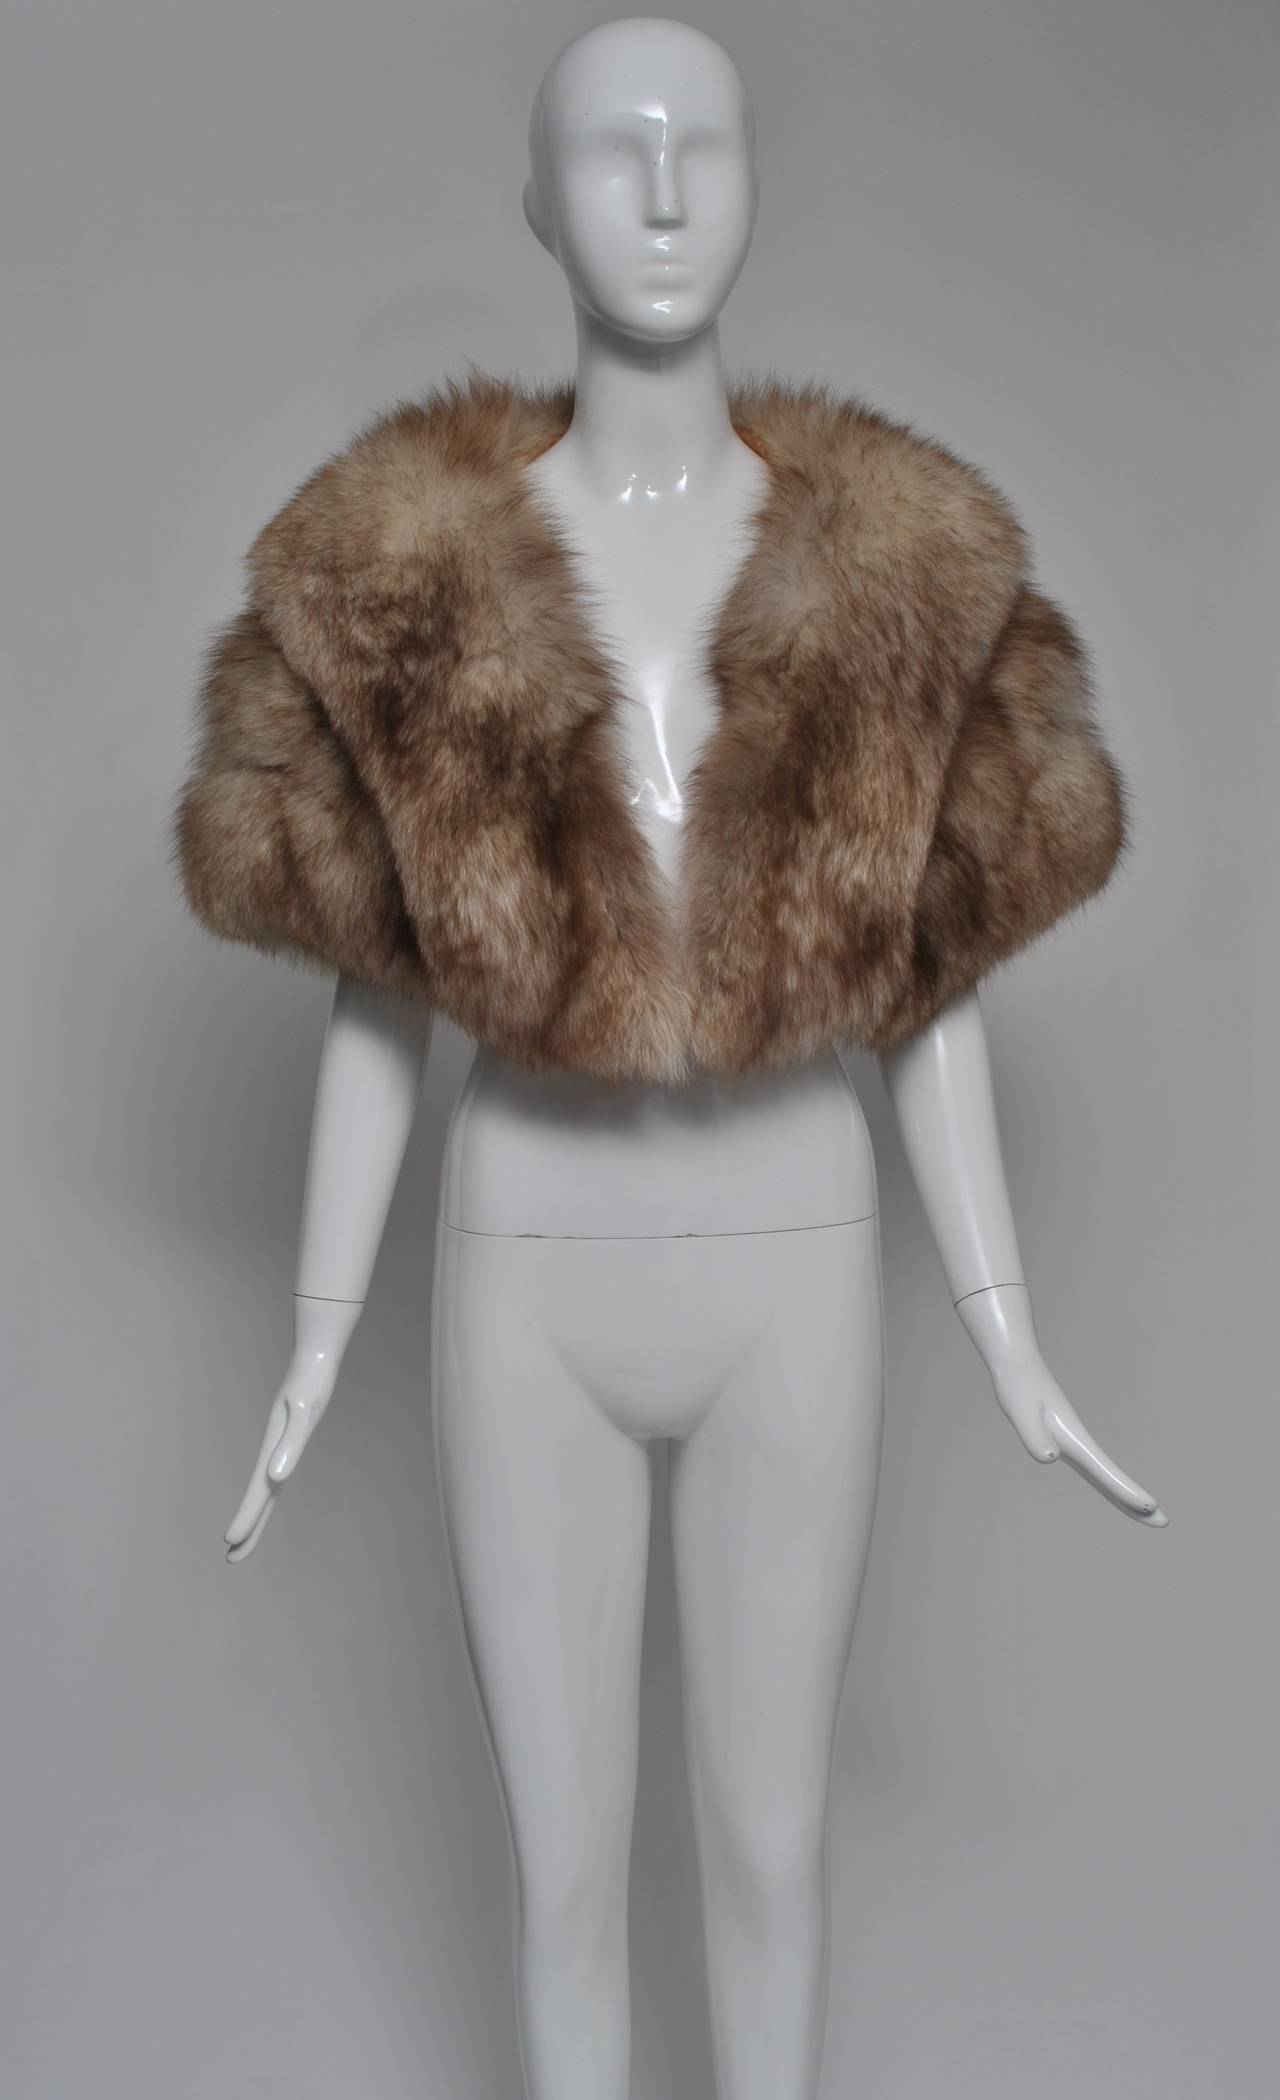 Lush fox stole in a lovely shade of beige/light brown. Deep skins with a shawl collar. Hook closure at bottom front. Skins are fluffy and supple.